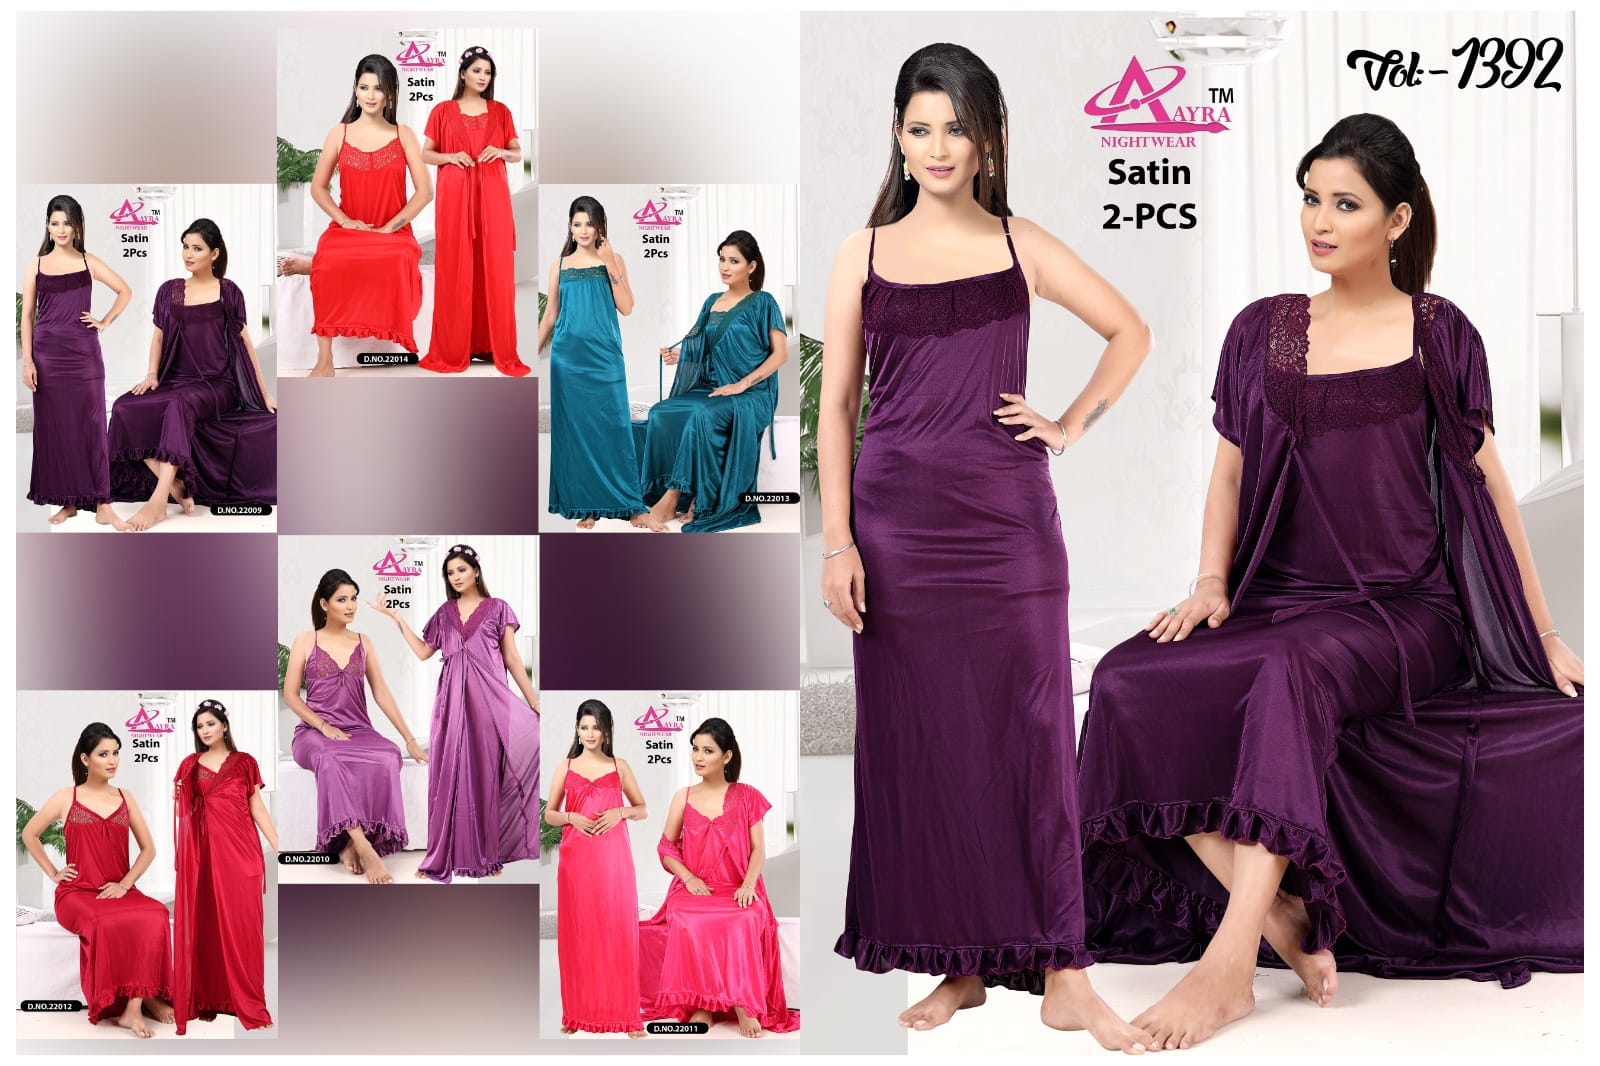 1307-1392 Aayra Satin Night Gowns